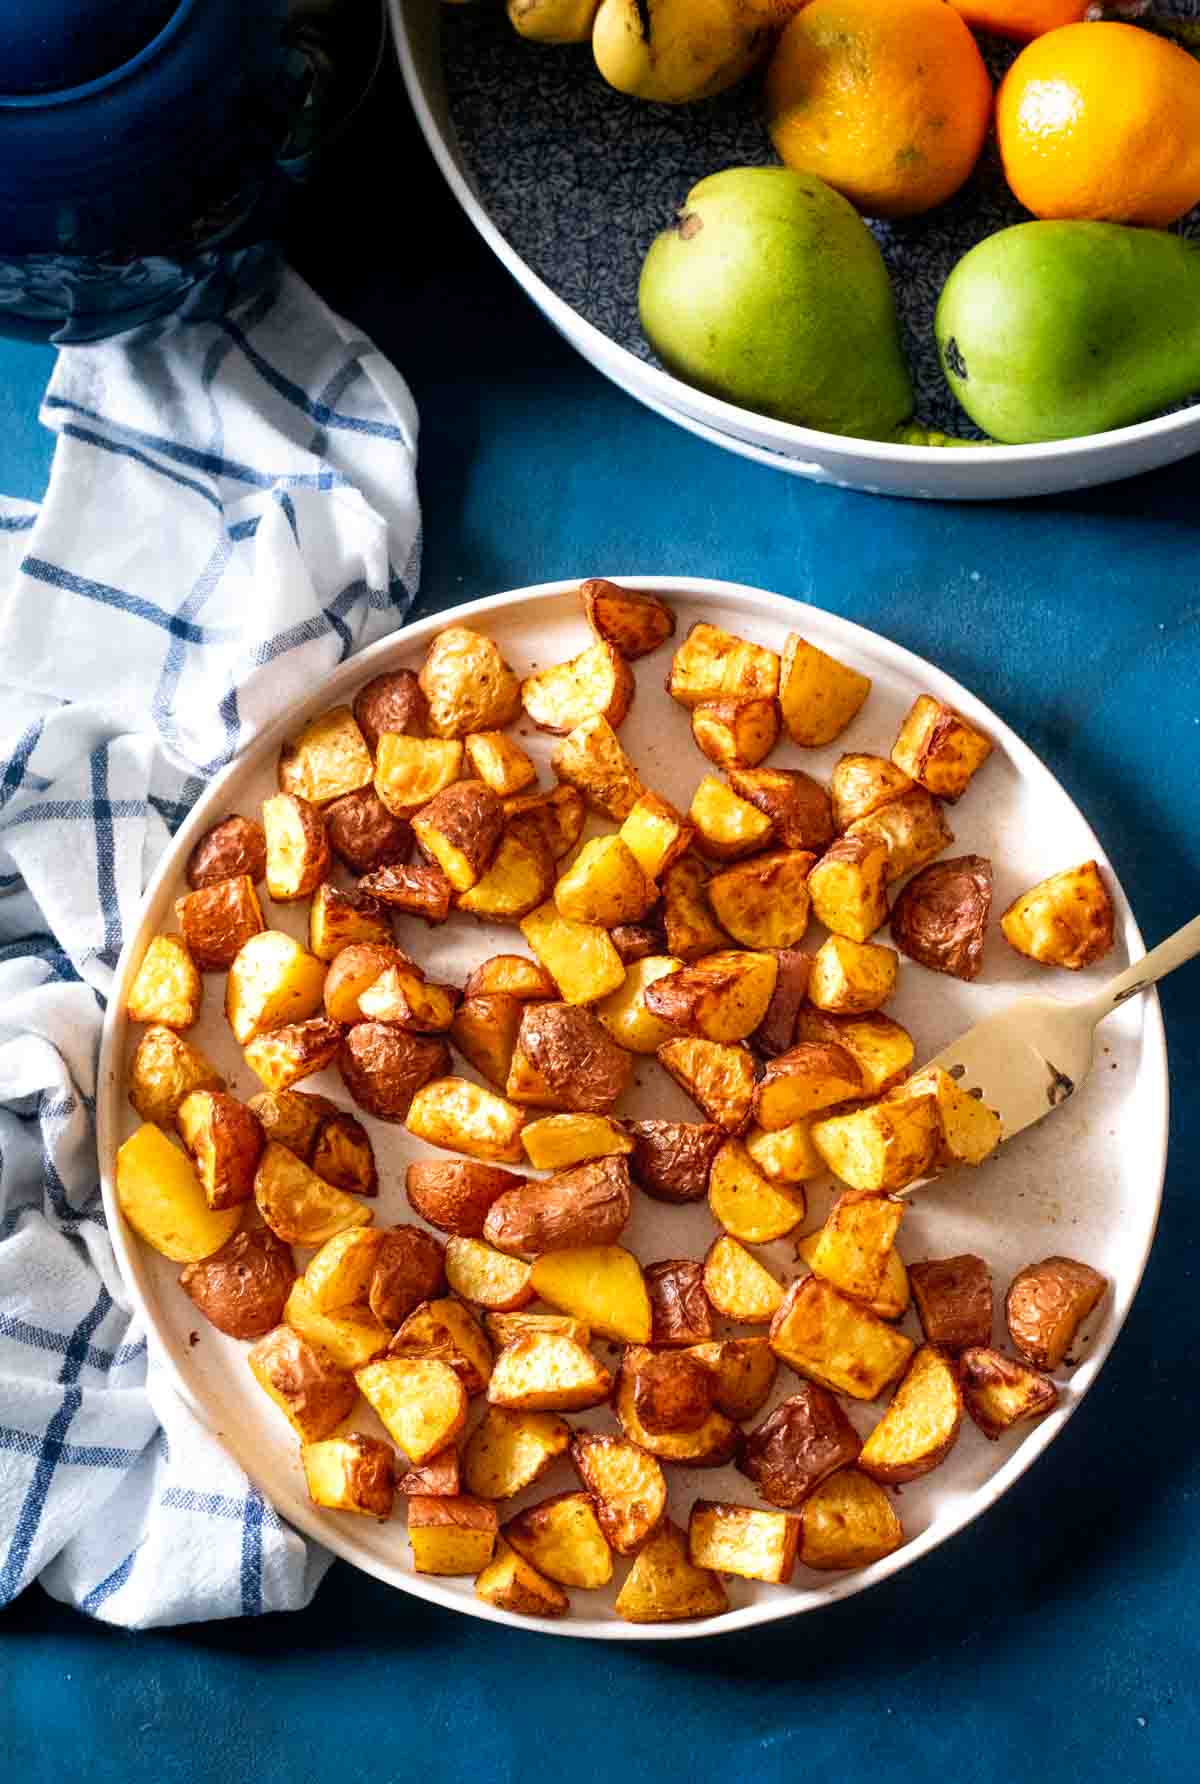 crispy golden brown potatoes on a plate next to fruit